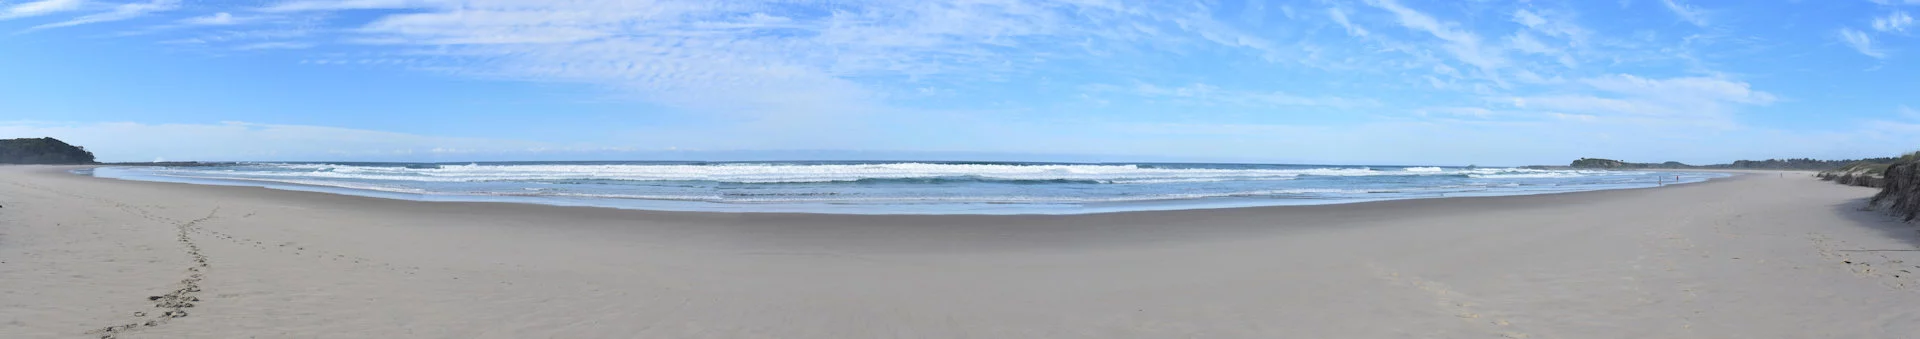 Beach panorama of a beach accessed from the Back Beach Picnic Area in Bundjalung National Park